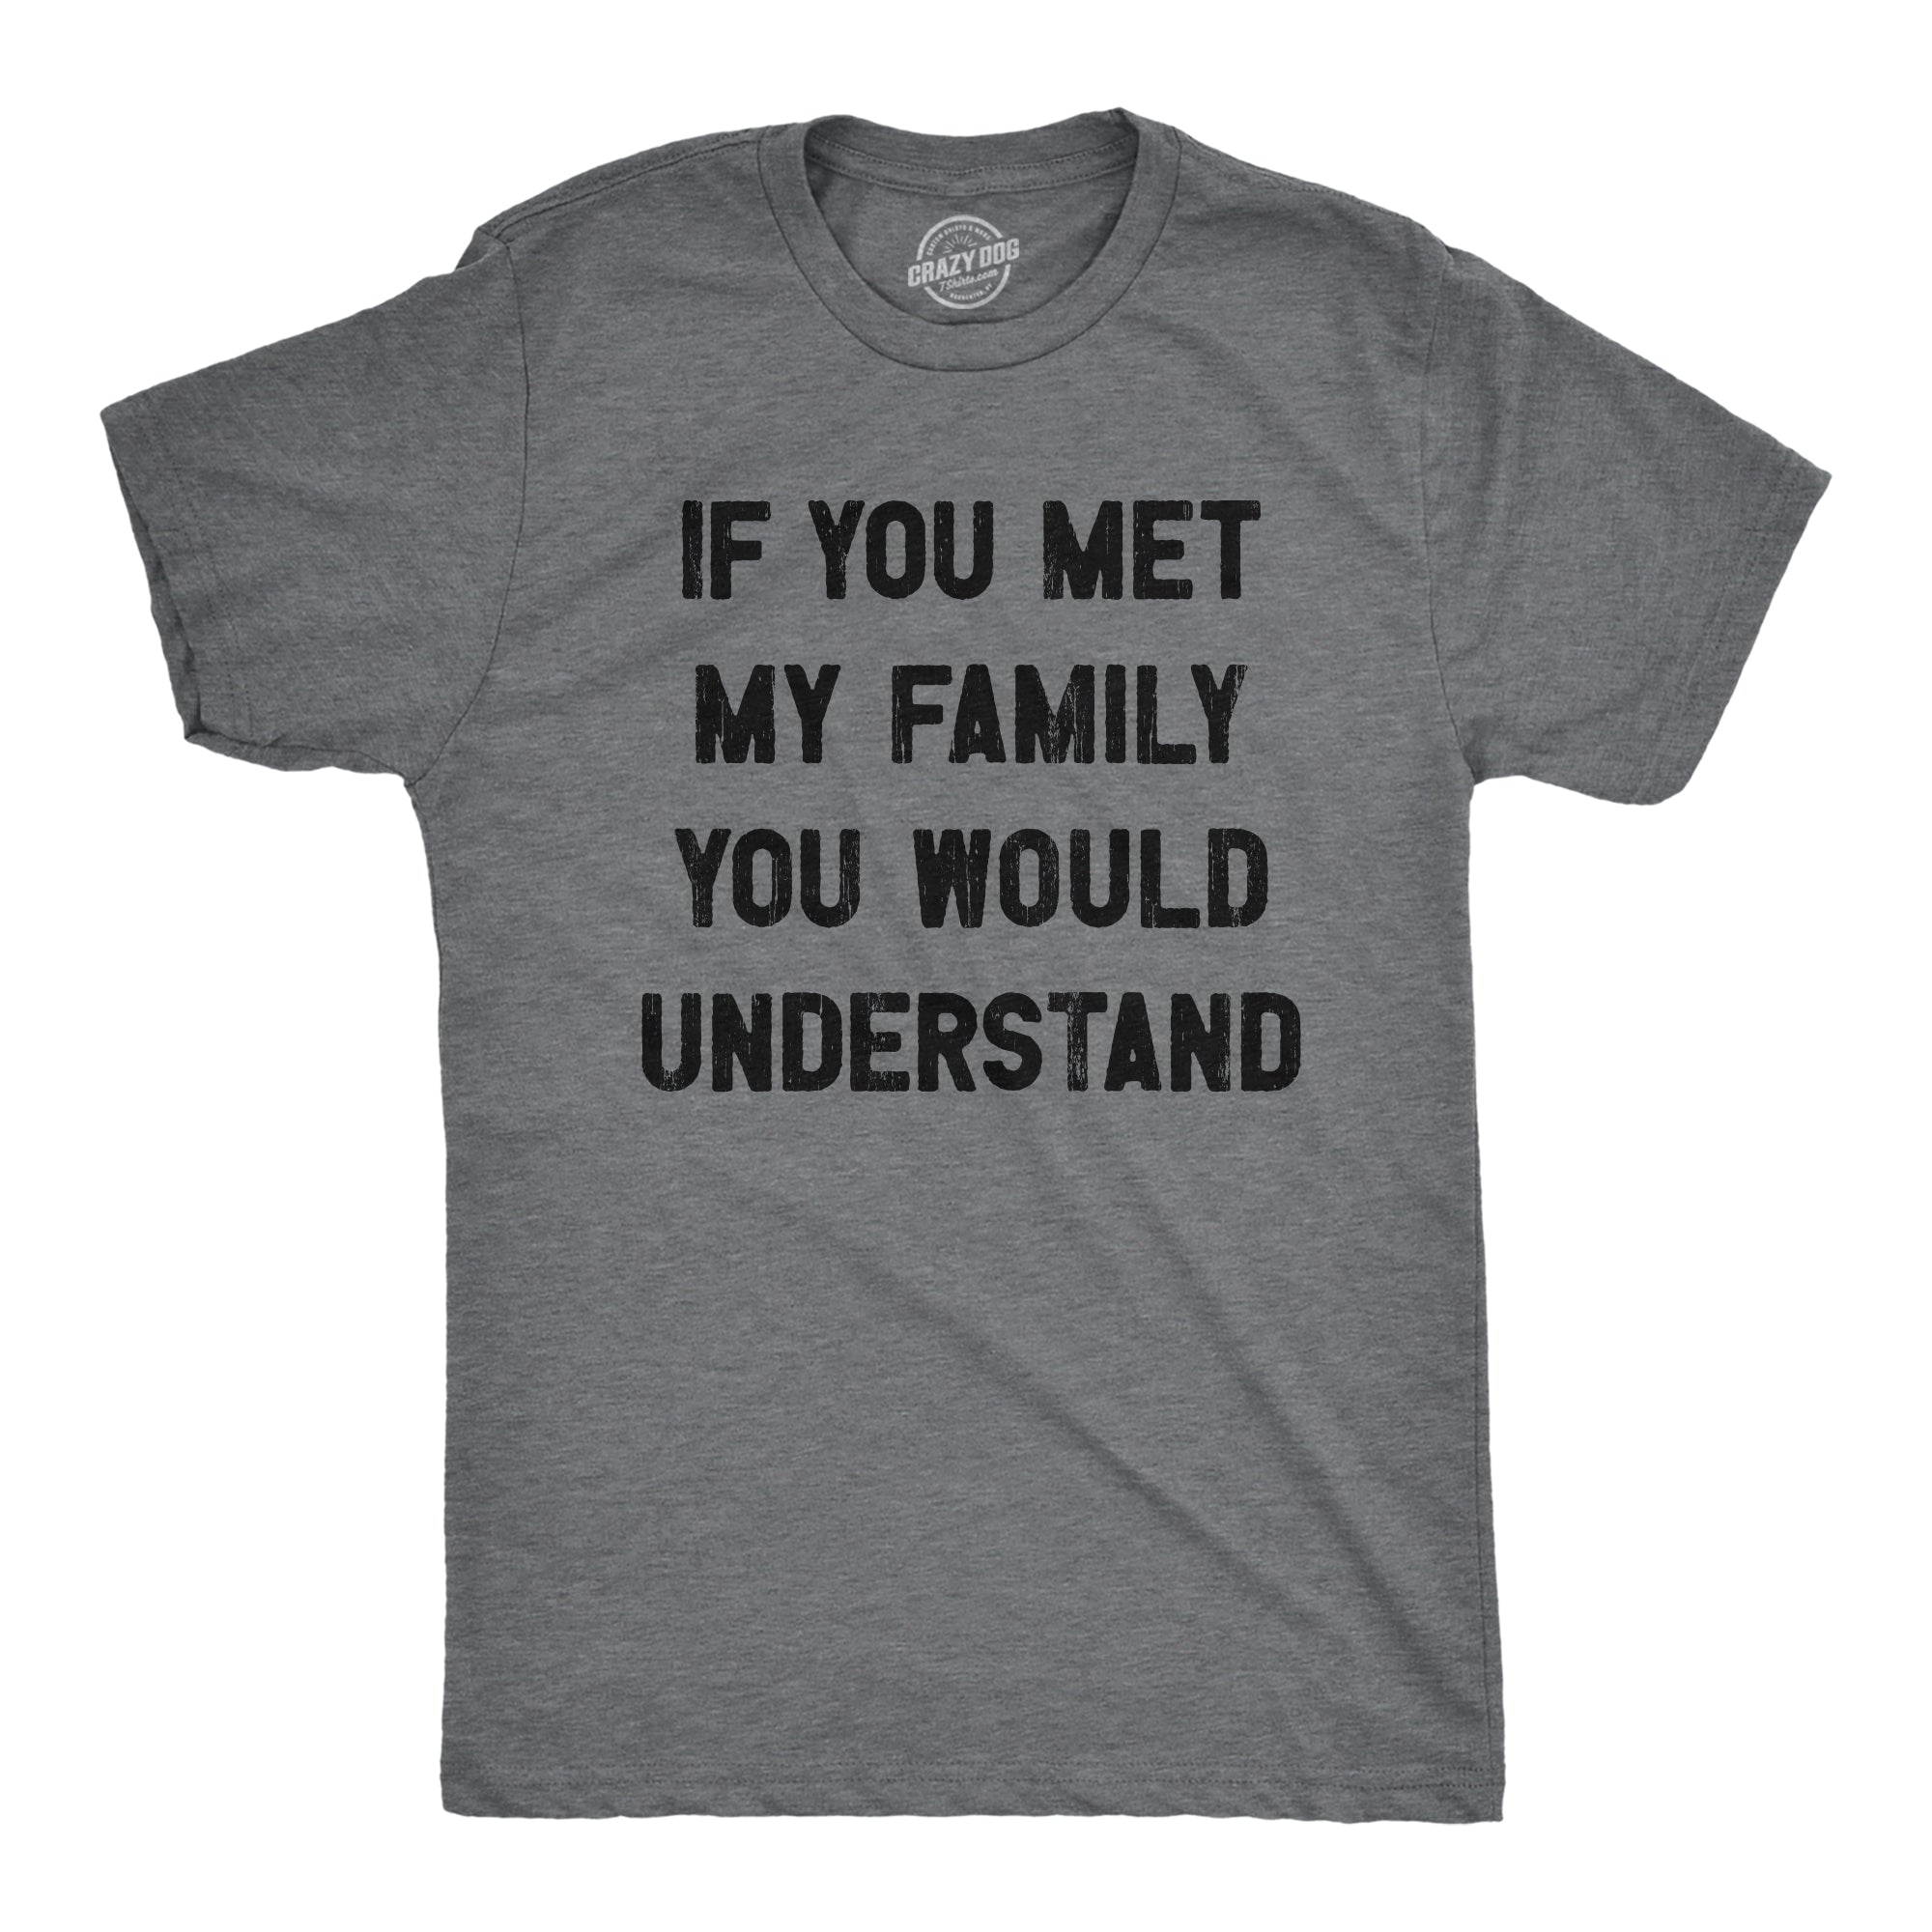 Funny Dark Heather Grey If You Met My Family You Would Understand Mens T Shirt Nerdy Sarcastic Tee